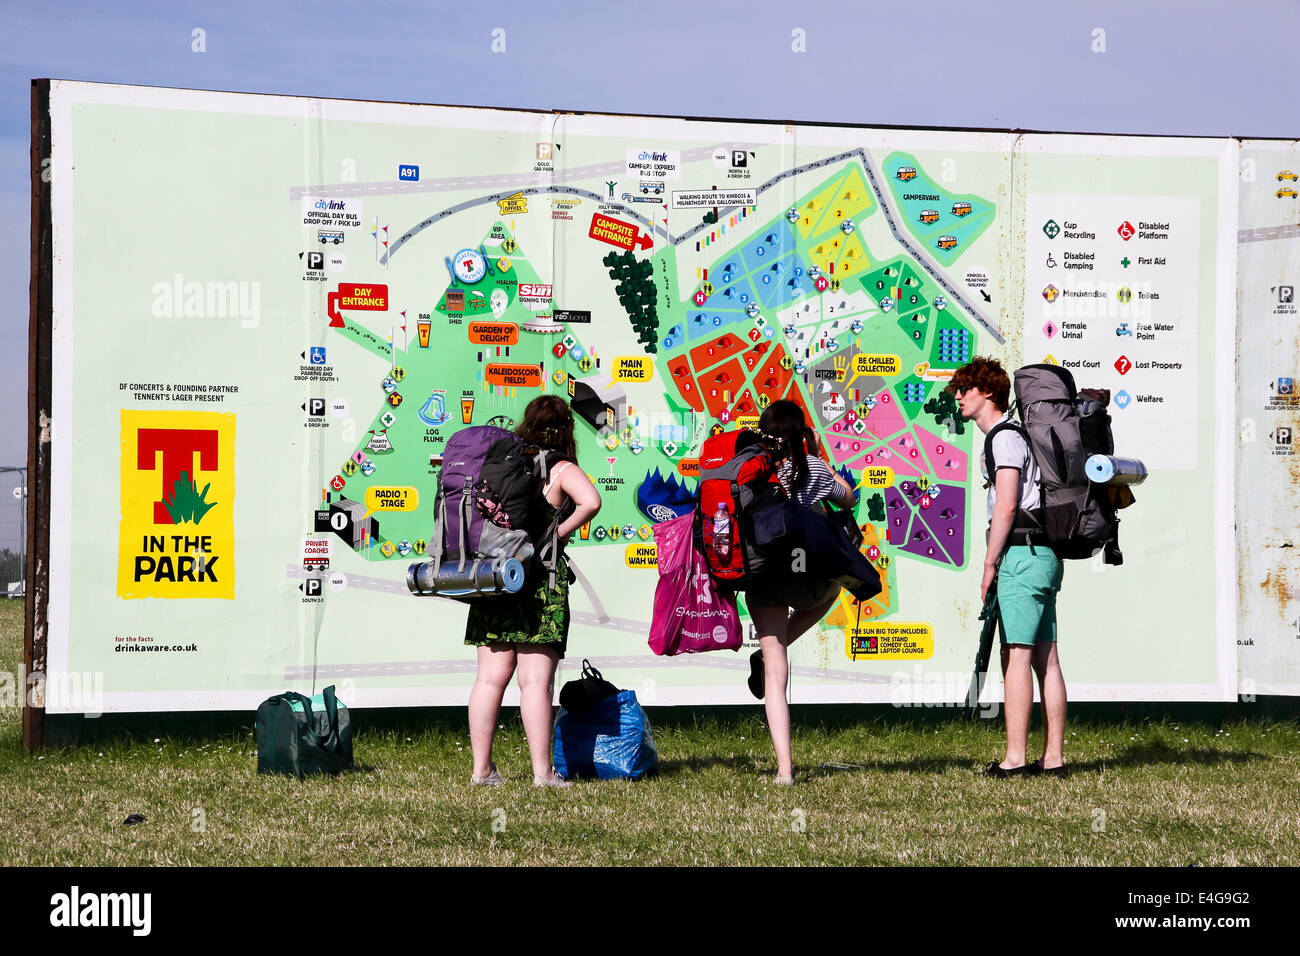 Balado, Kinross, Scotland, UK. 10th July, 2014. Early arrivals enjoying the welcome sunshine as they prepare for the weekend. Fans checking the site map Credit:  ALAN OLIVER/Alamy Live News Stock Photo